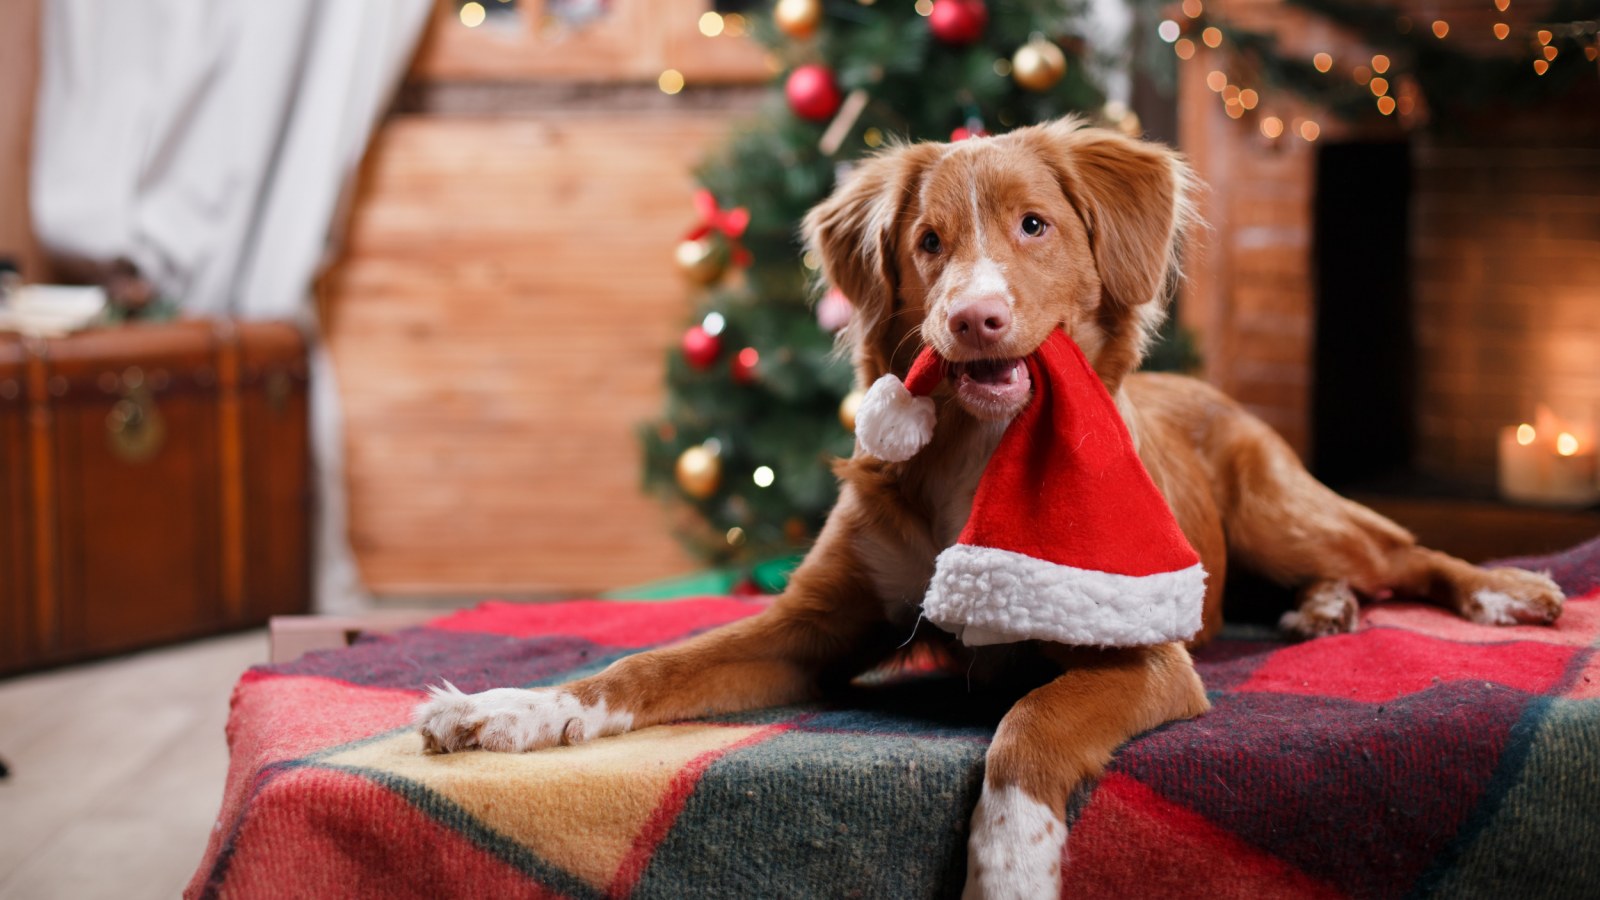 The best way to keep out the cold is to prepare enough warm clothing for your furry child. Taking advantage of Christmas, the owner might as well try to buy some clothes full of Christmas atmosphere for the furry child, so as to keep warm and celebrate the festival.